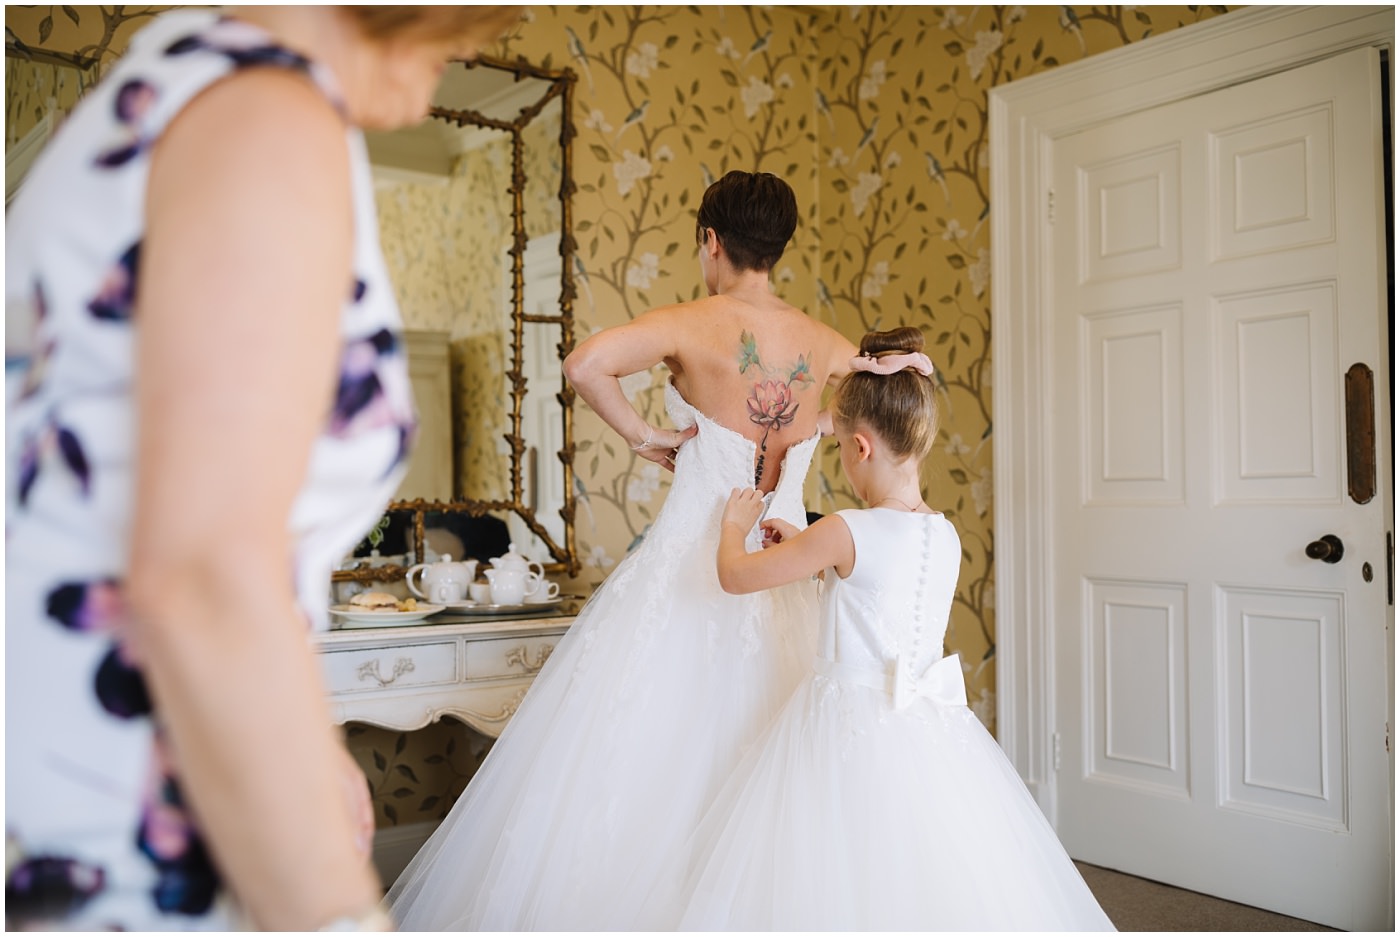 Brides daughter assists with wedding dress at eaves hall